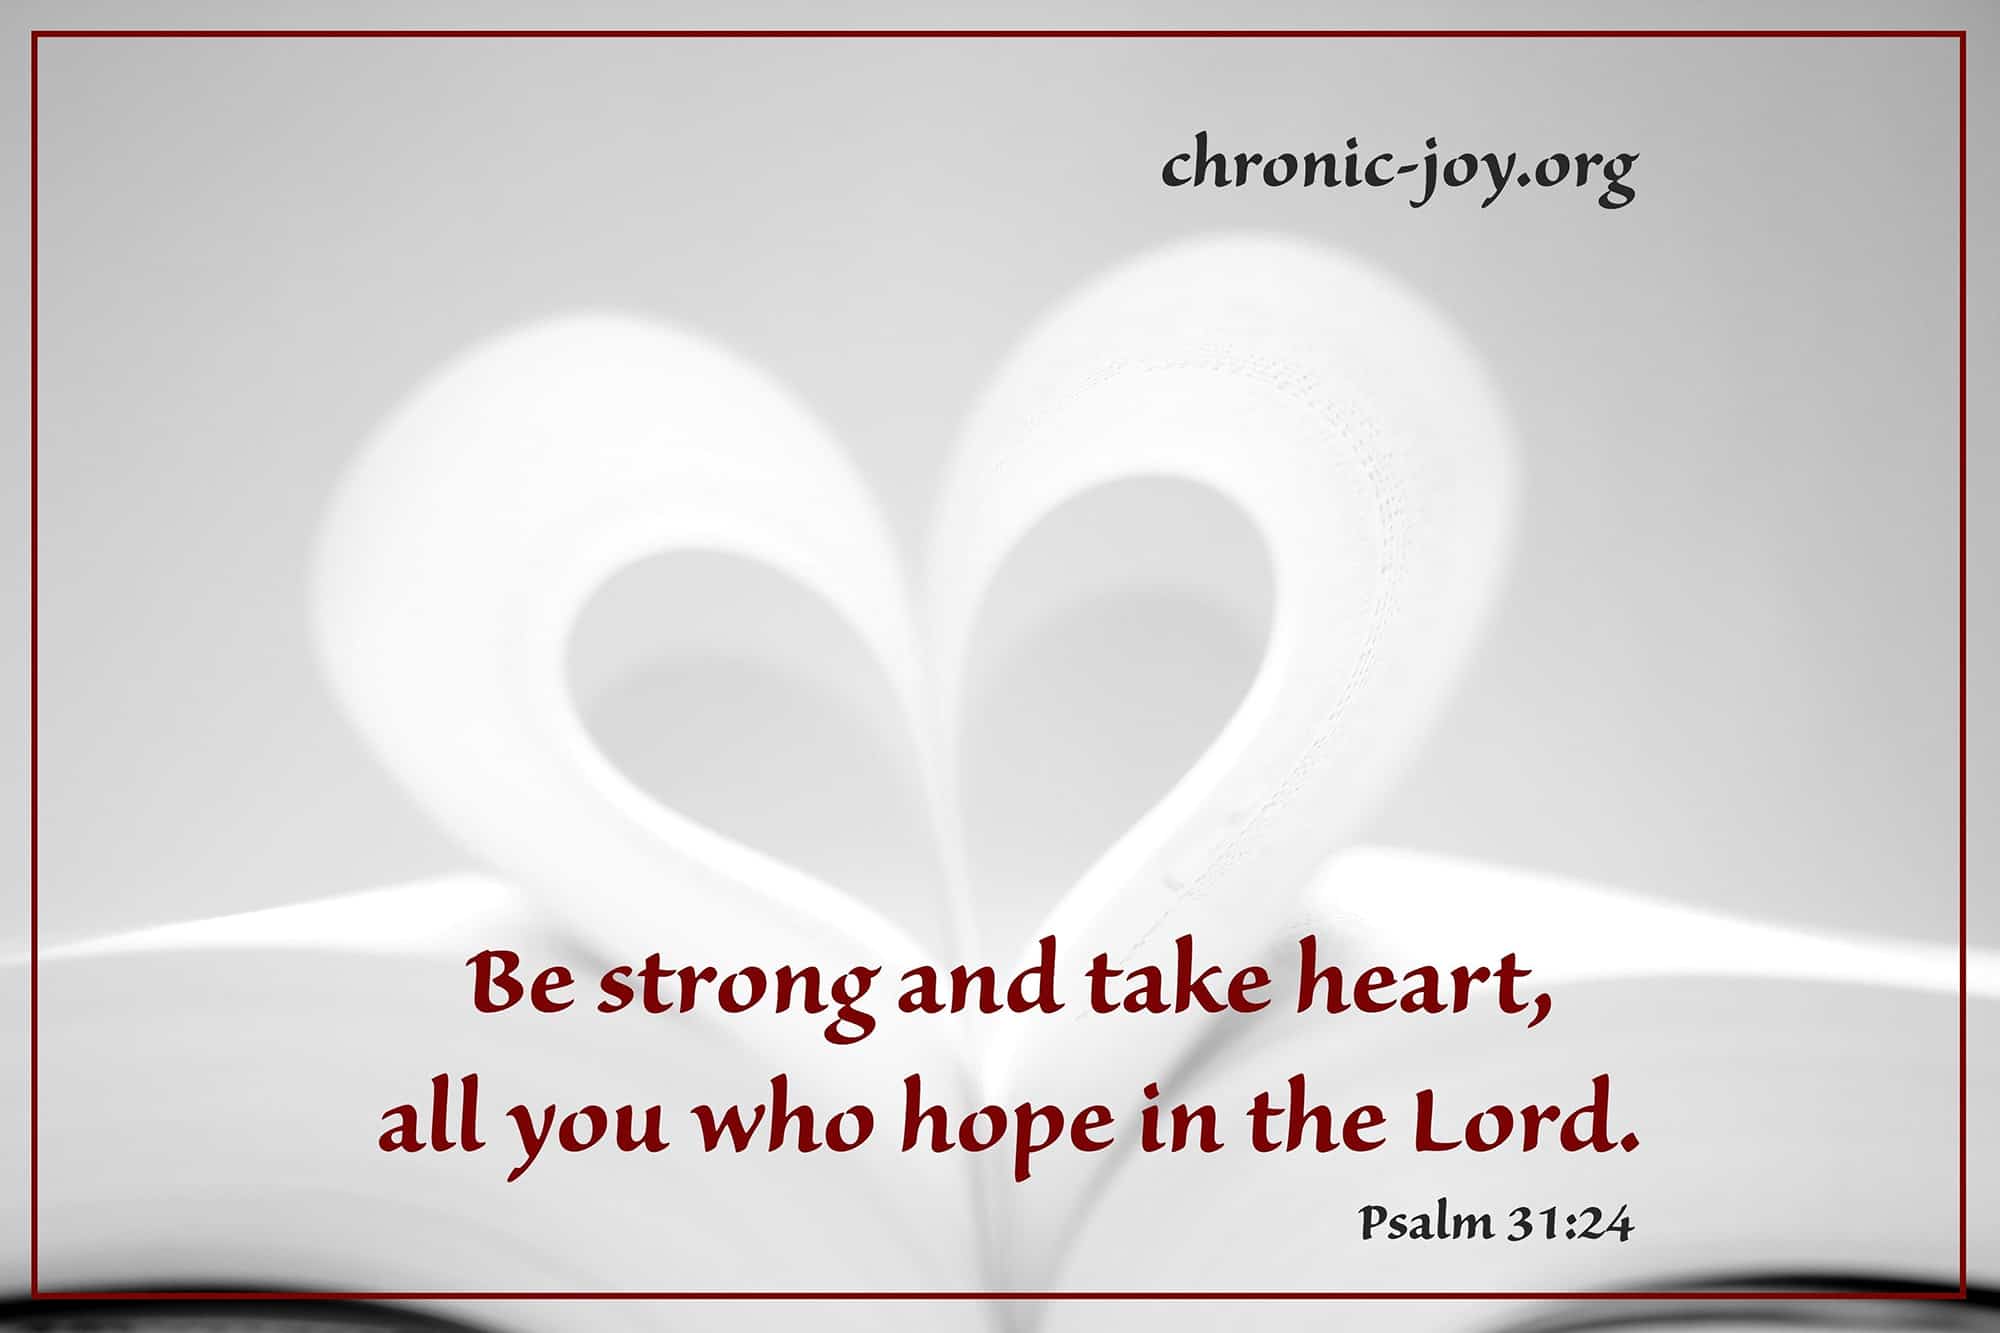 Be strong and take heart, all you who hope in the Lord.